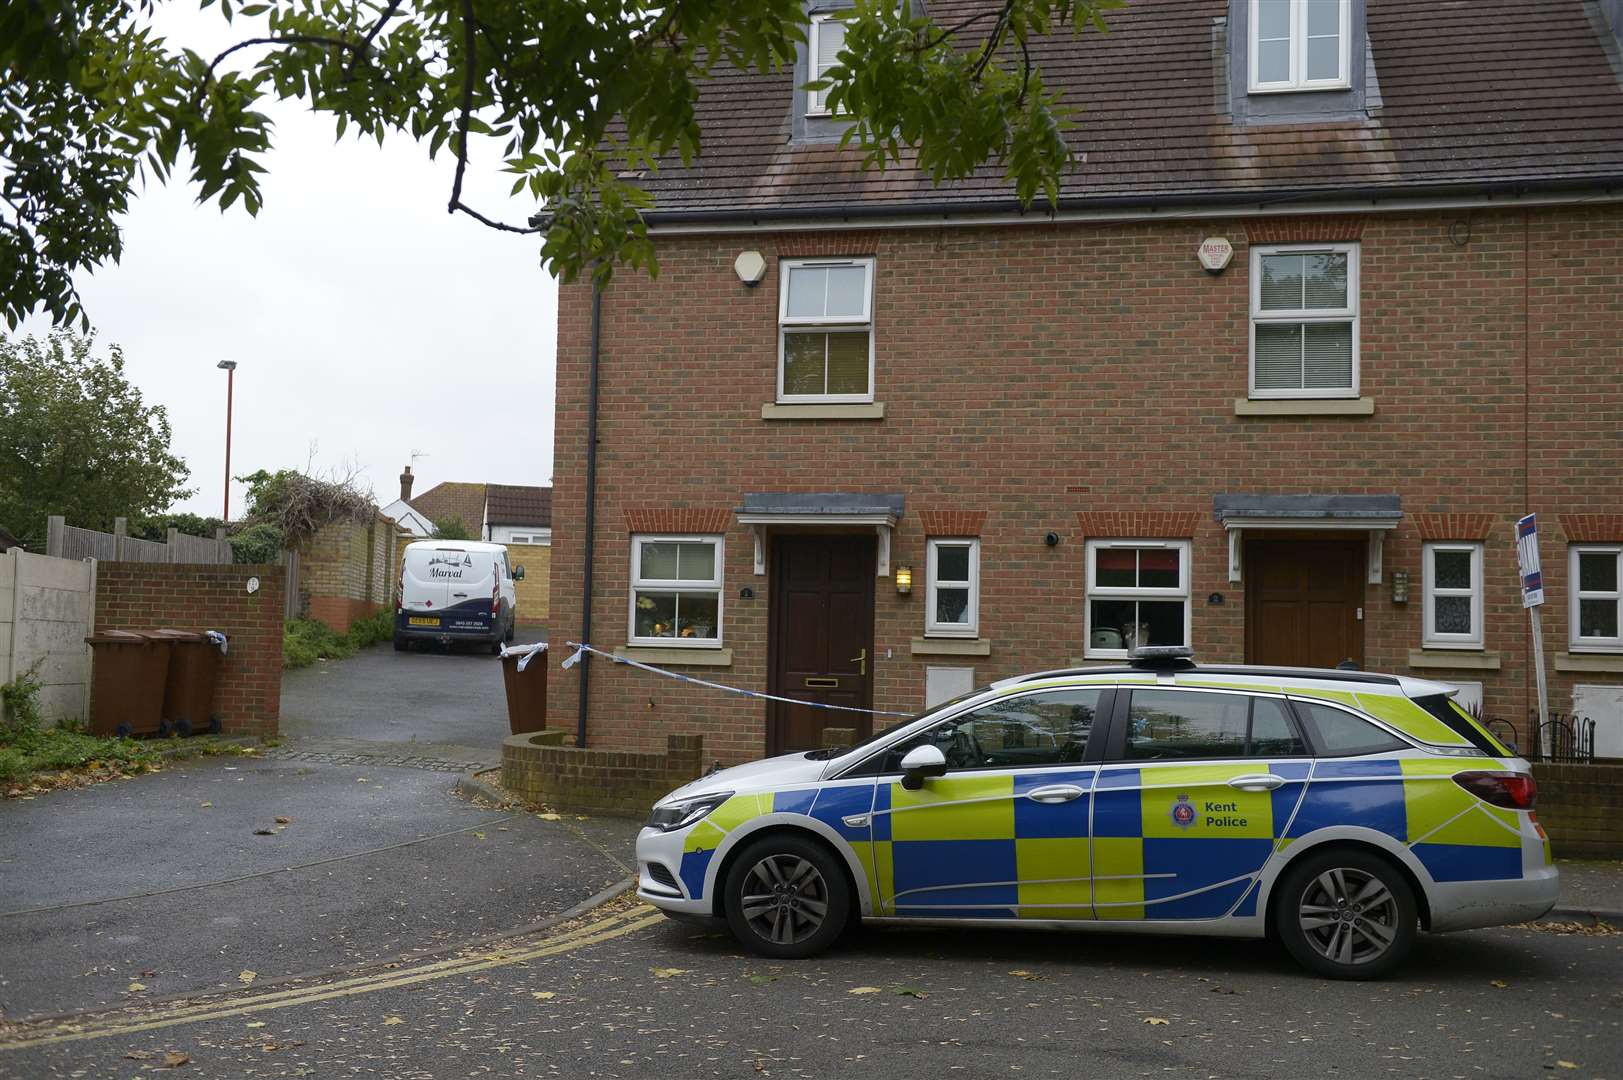 Cordon at Oast View Terrace, Rainham, after Lesley Spearing's body was discovered